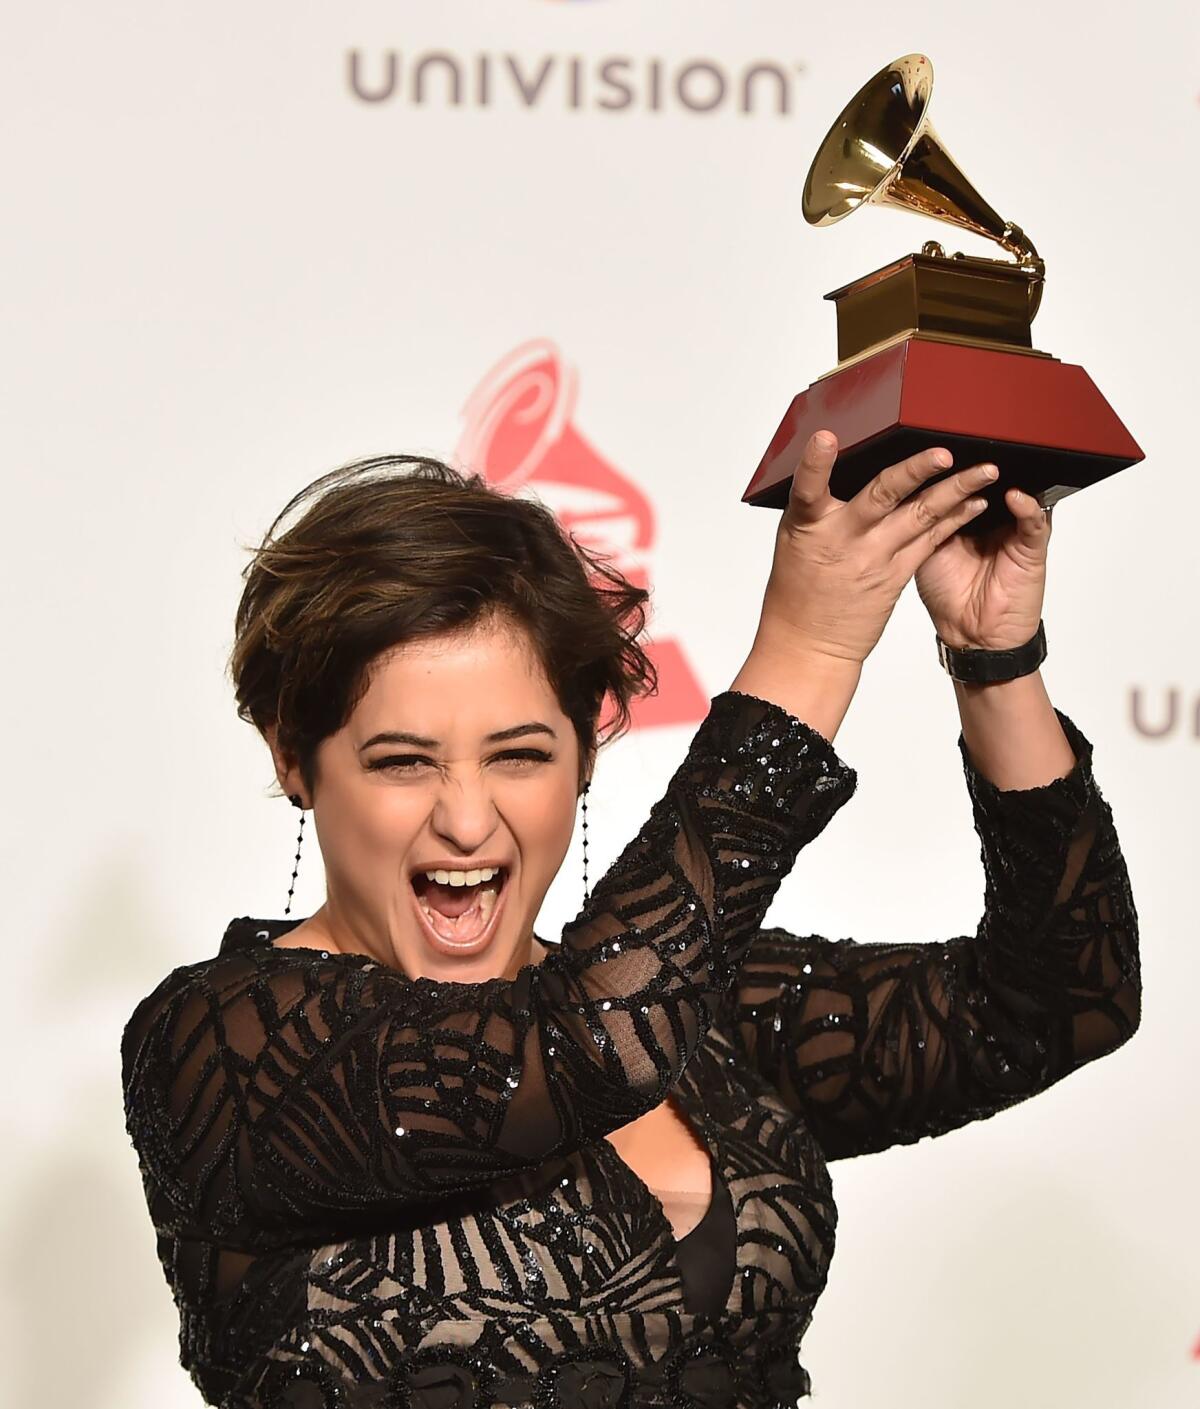 Linda Briceno holds the Latin Grammy for Producer of the Year during the 19th Latin Grammy Awards.